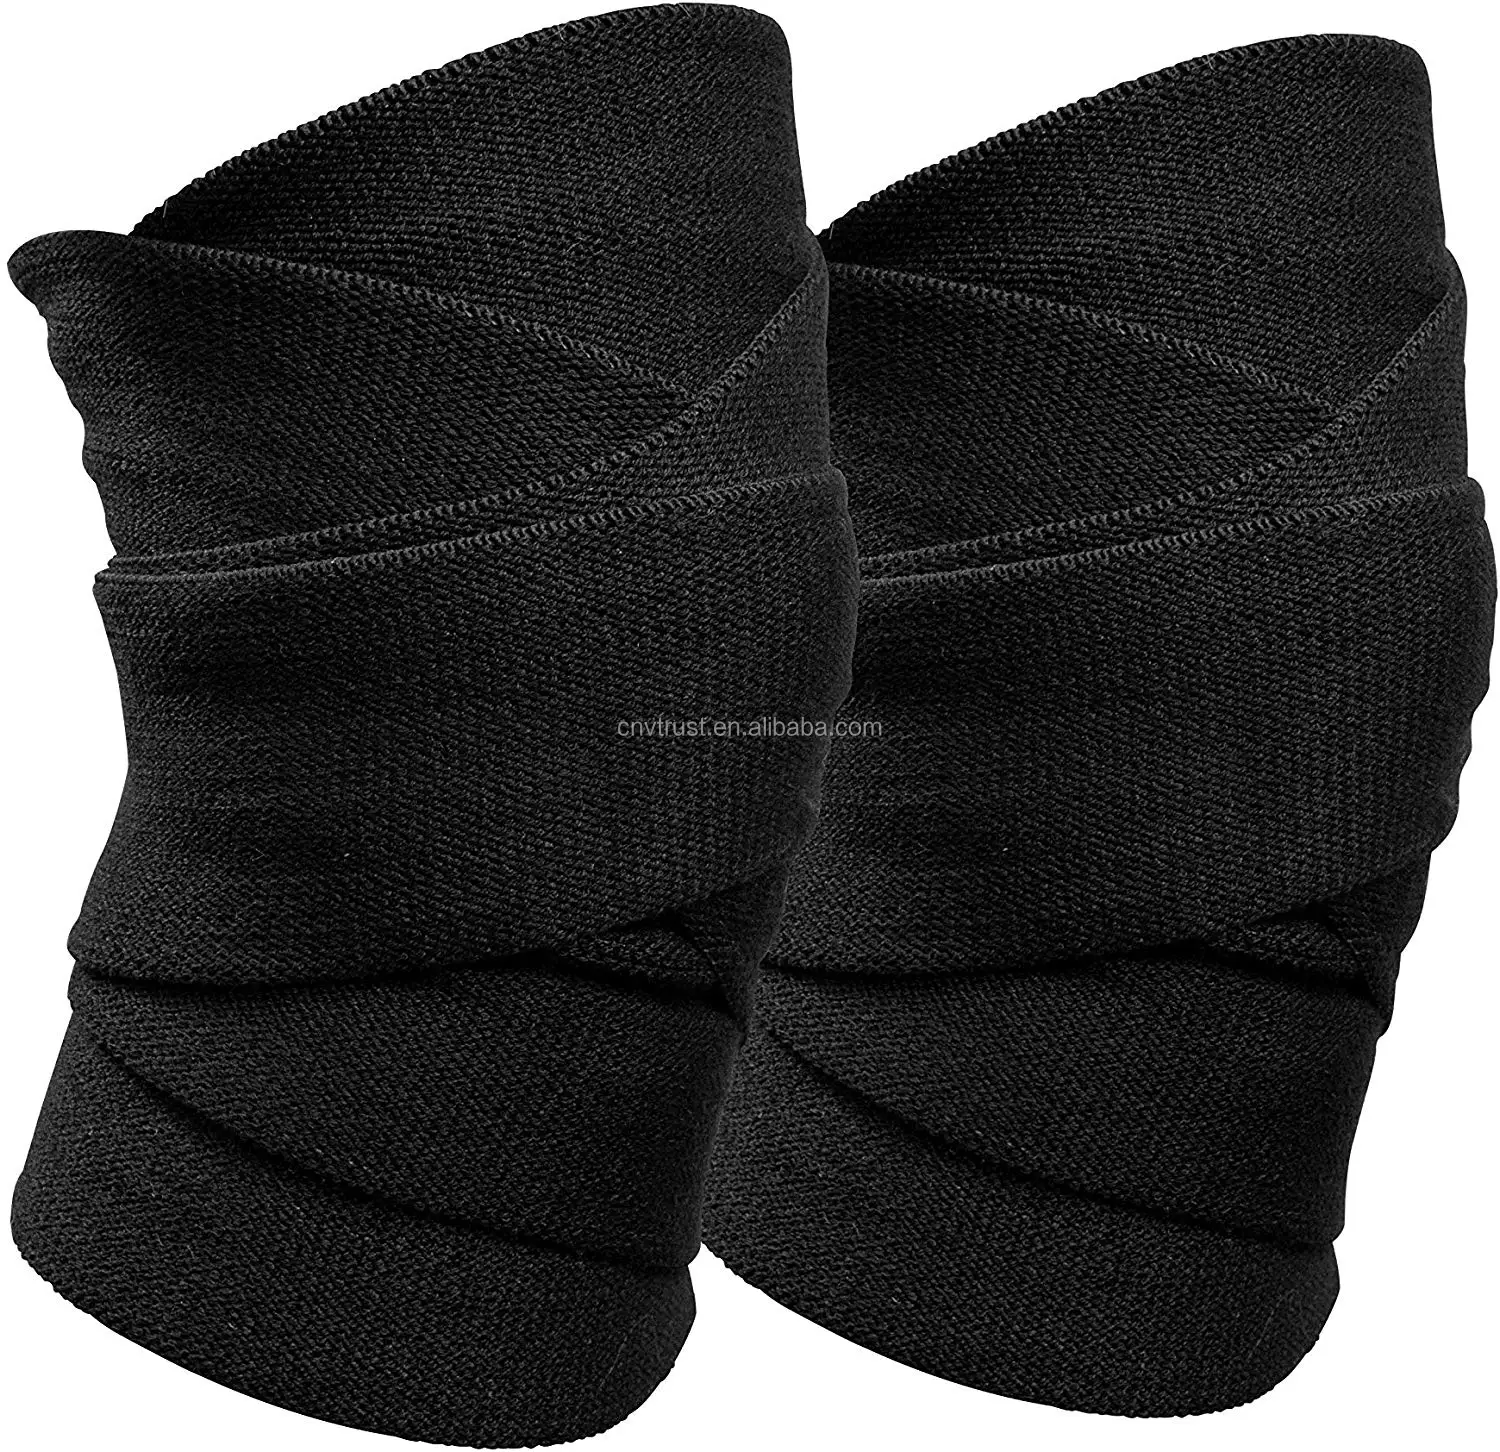 

Knee Wraps Knee Support Braces for Weight Lifting, Powerlifting, Strength and Cross Training, Customized color